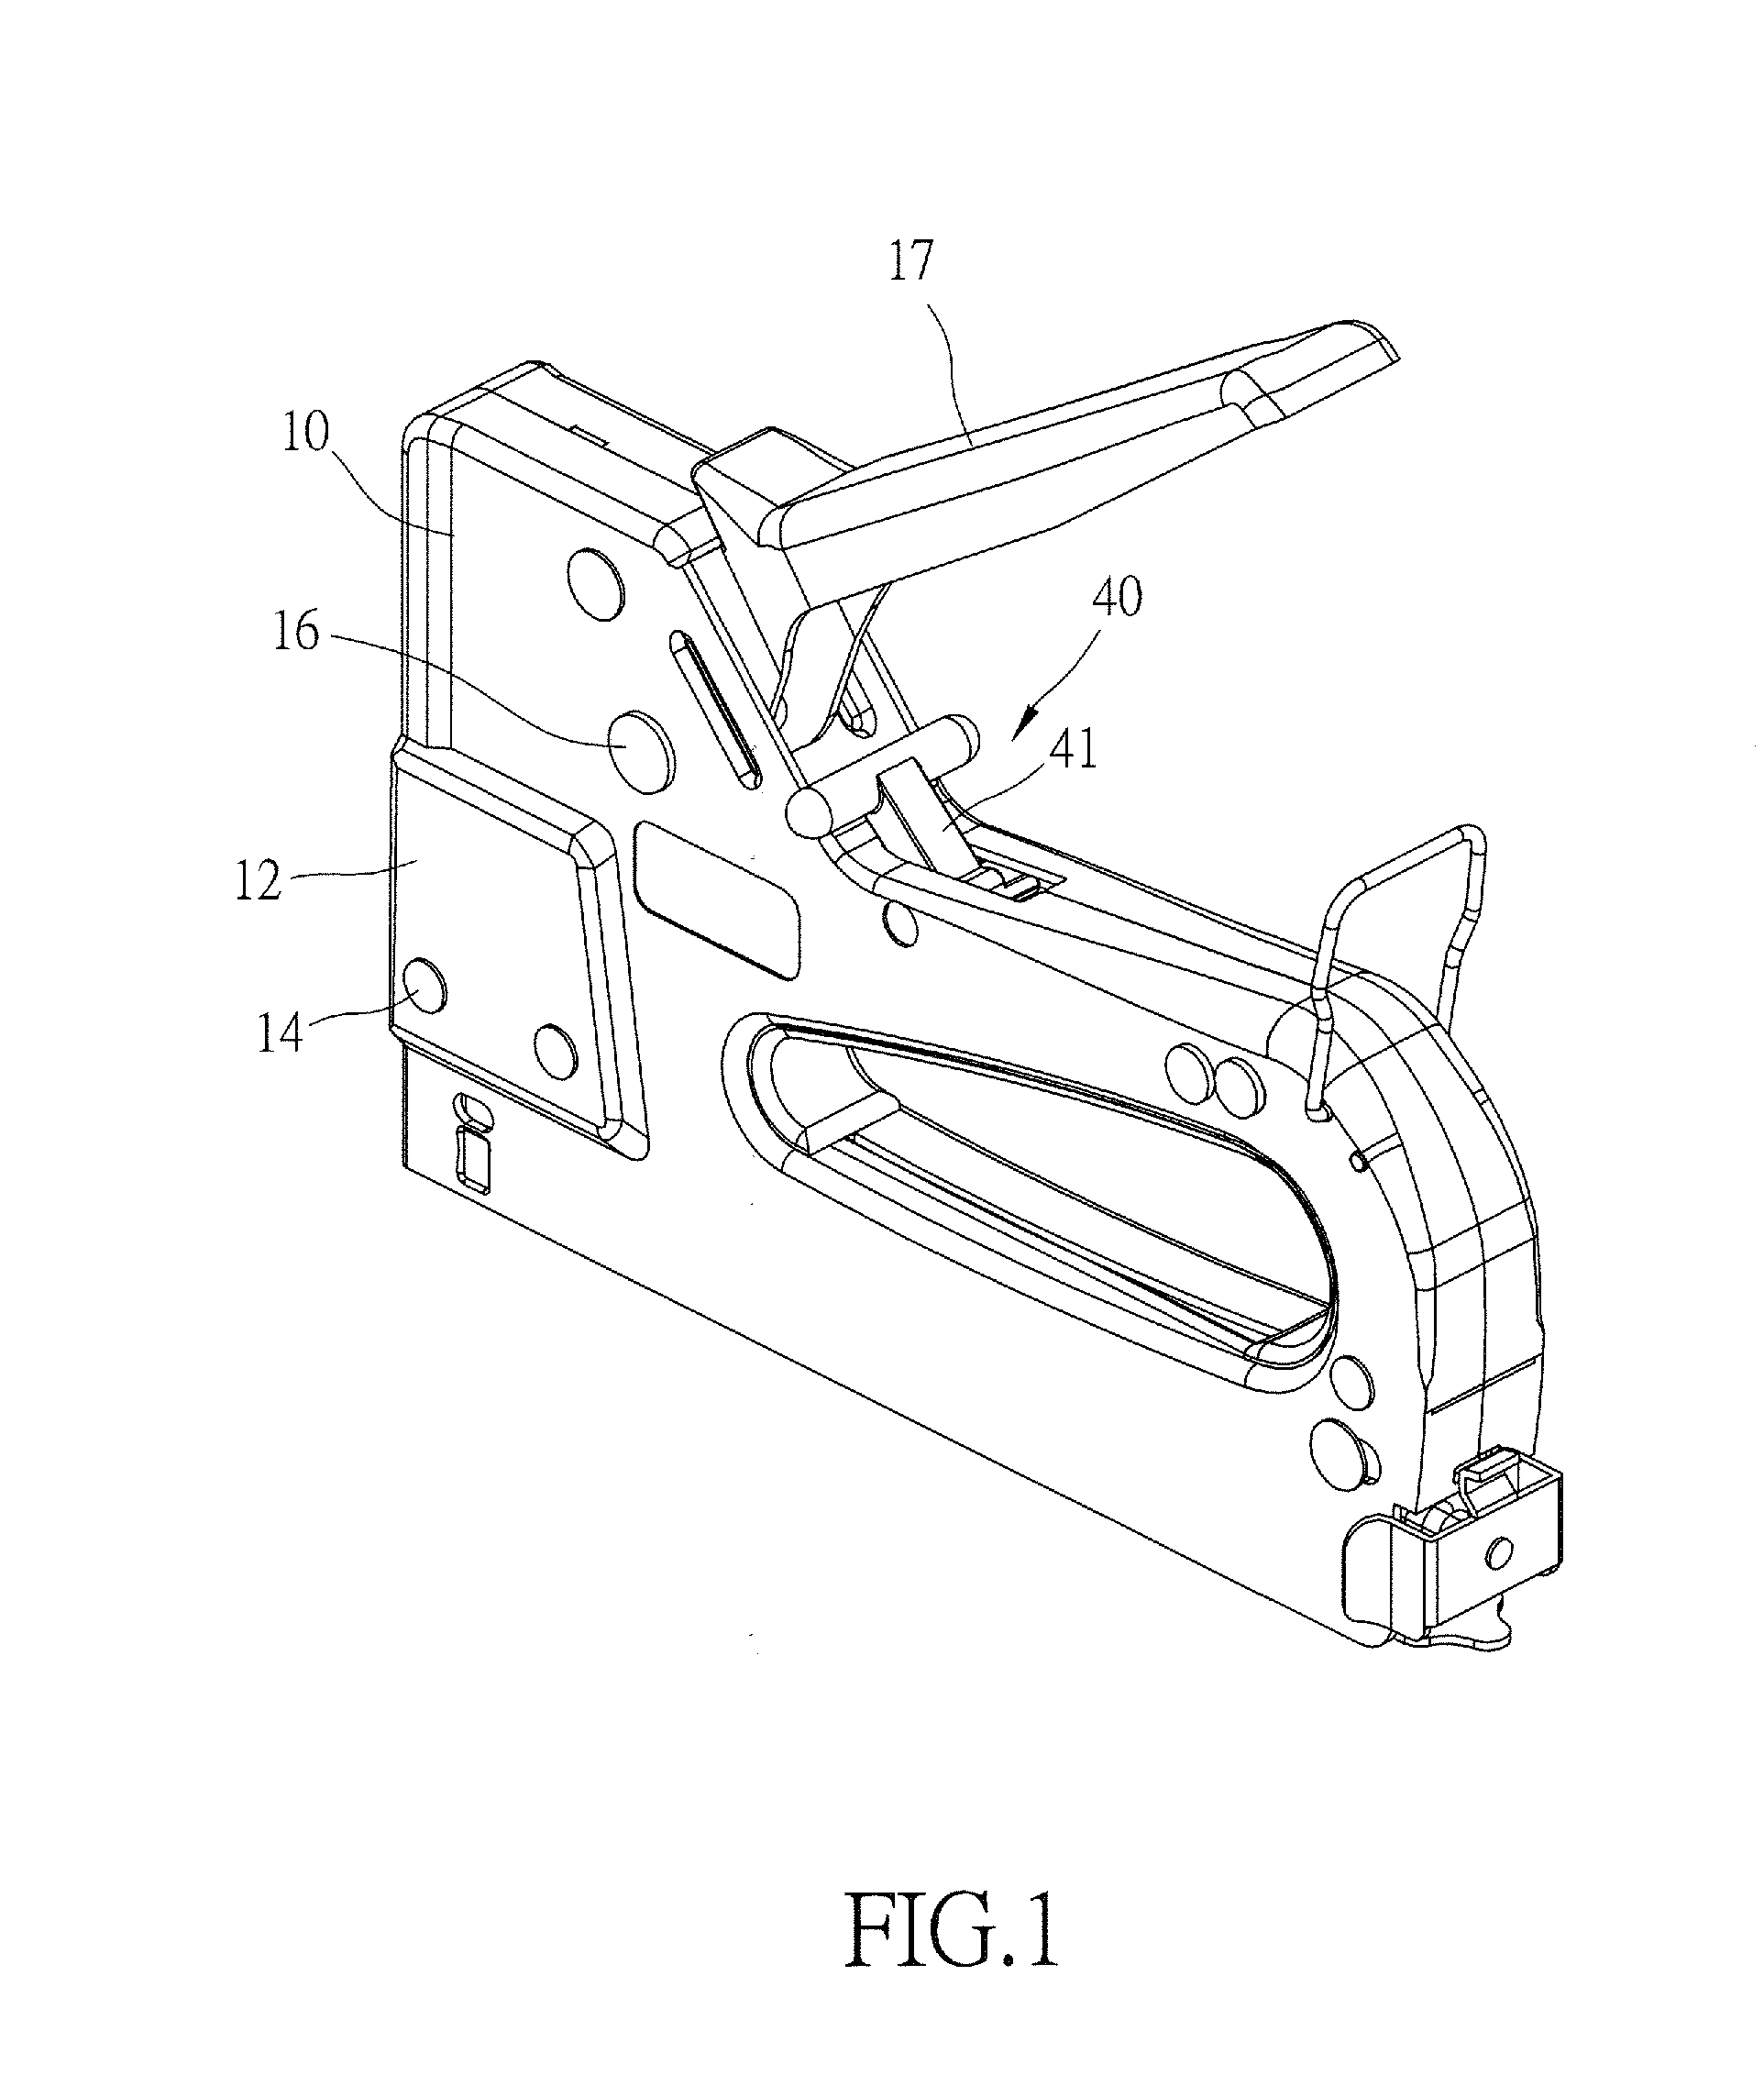 Structure of stapling device